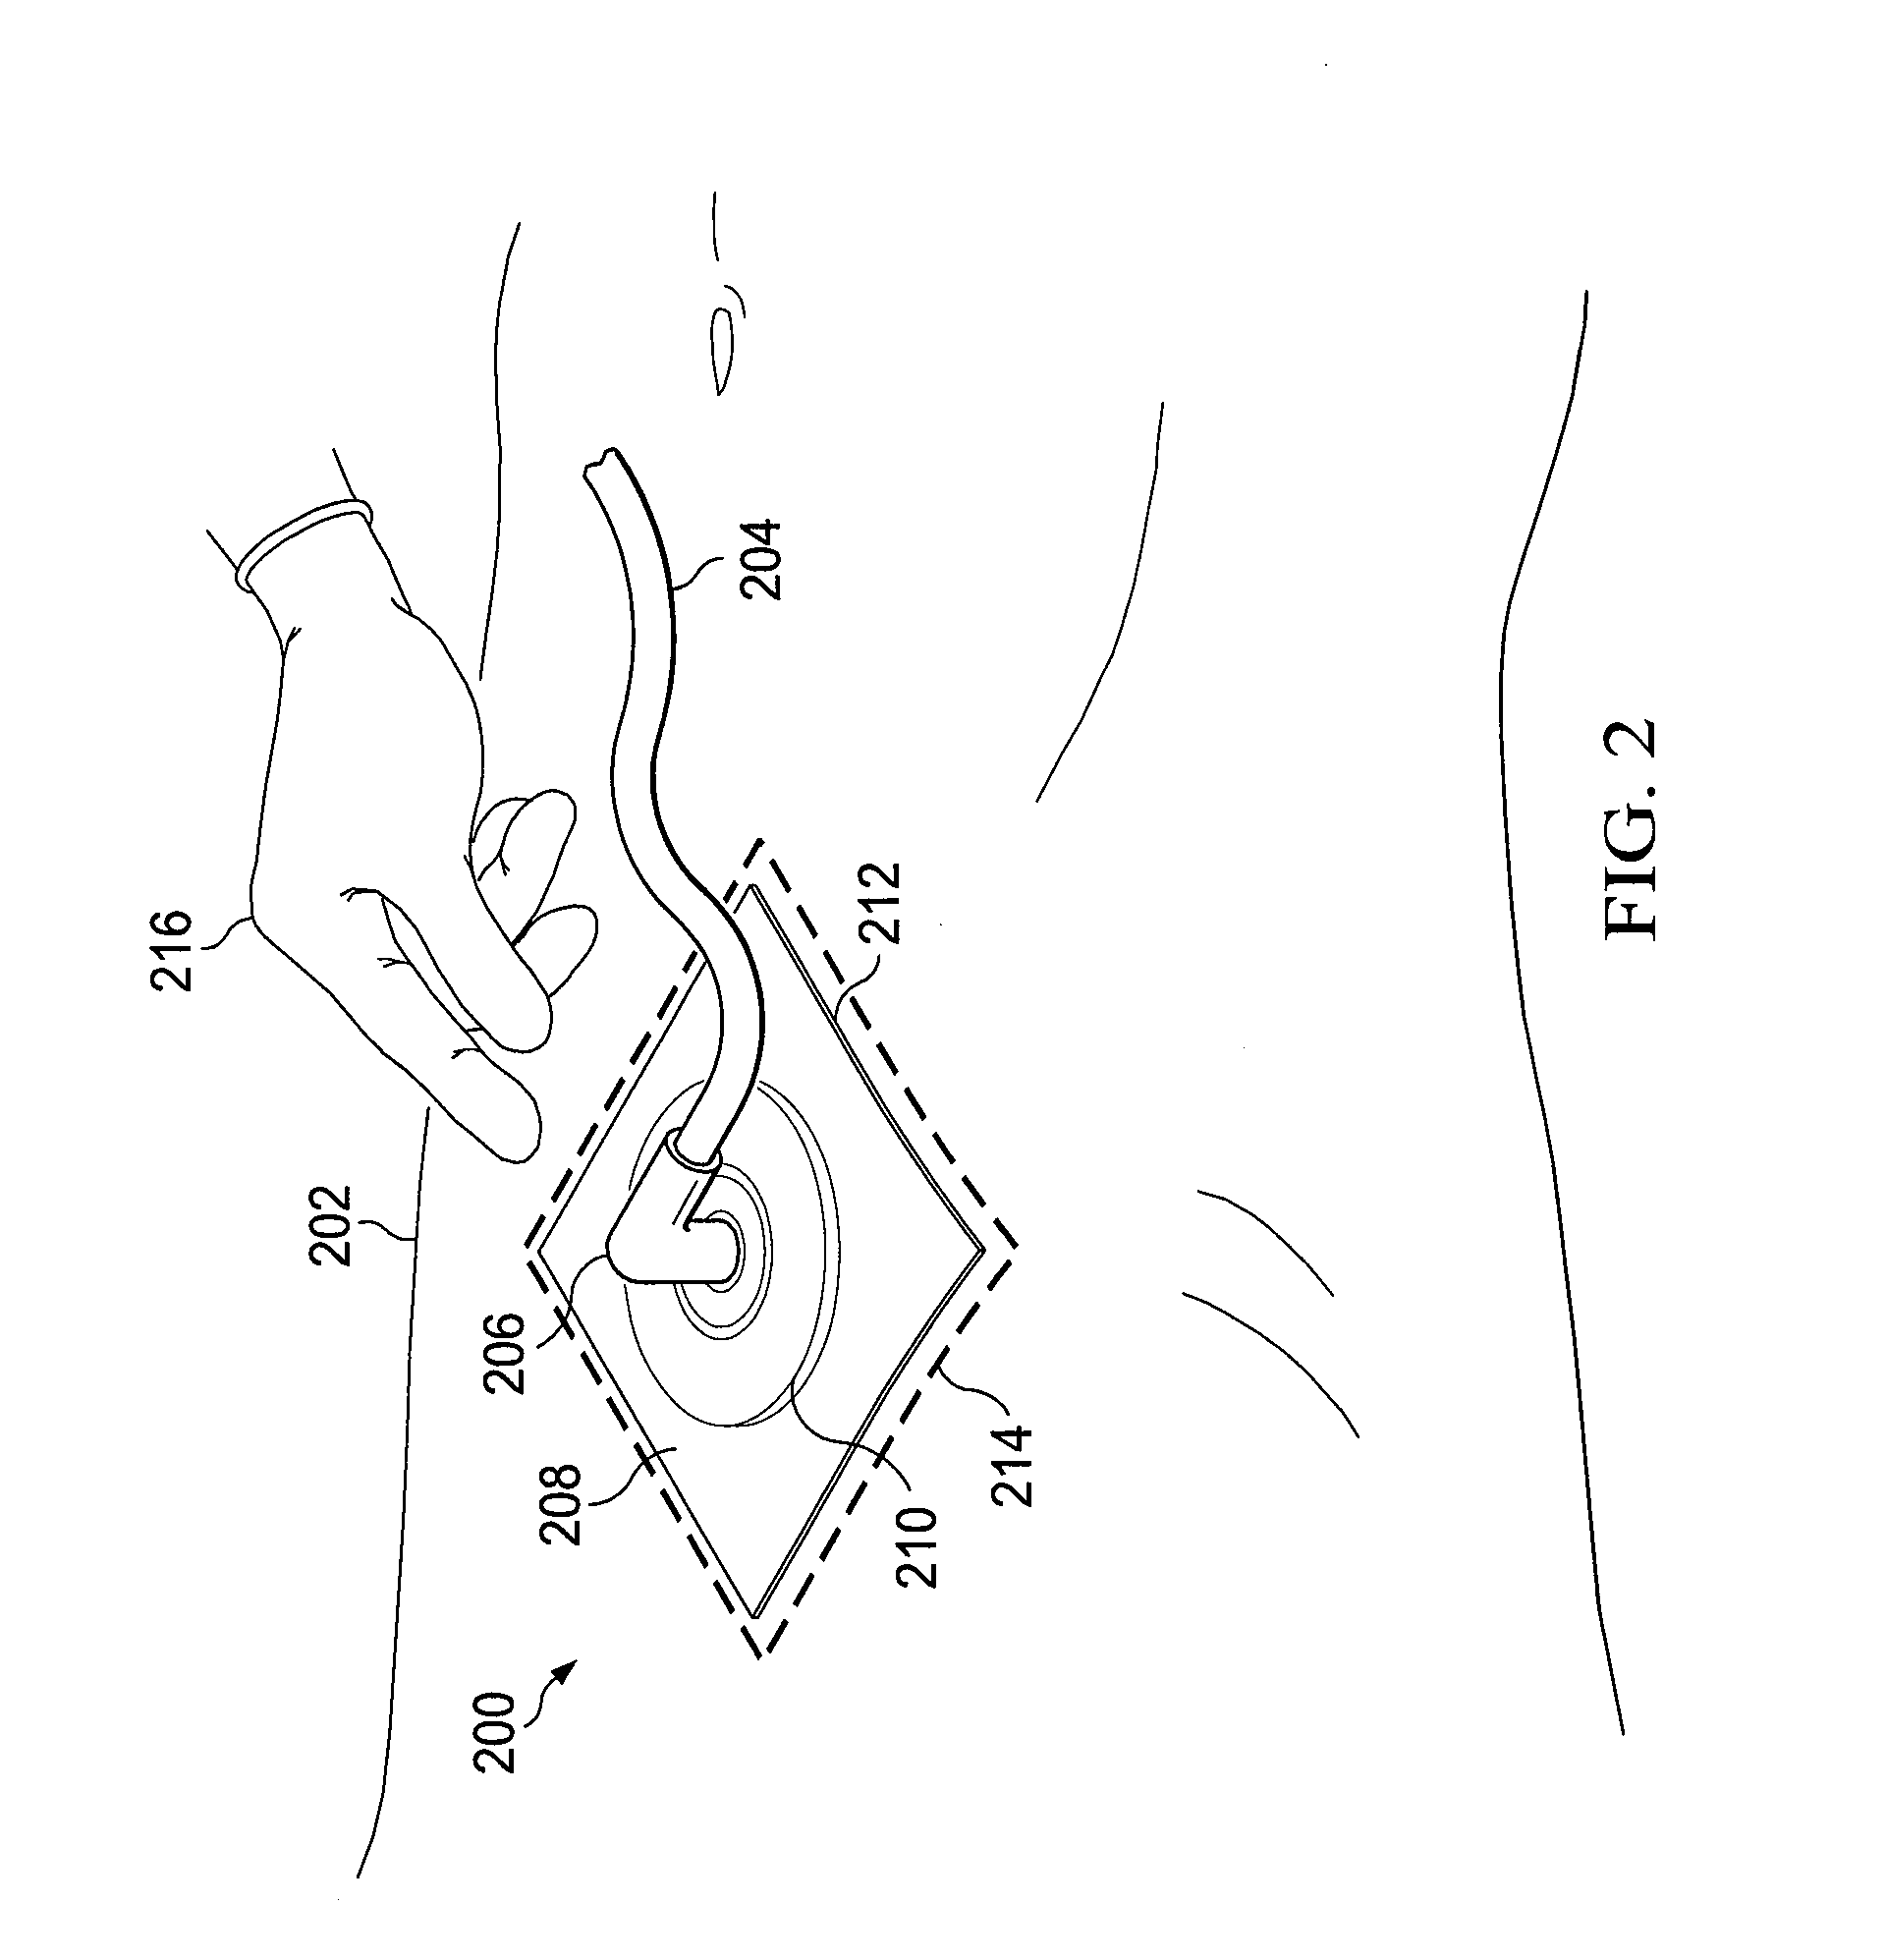 System and method for locating fluid leaks at a drape using sensing techniques